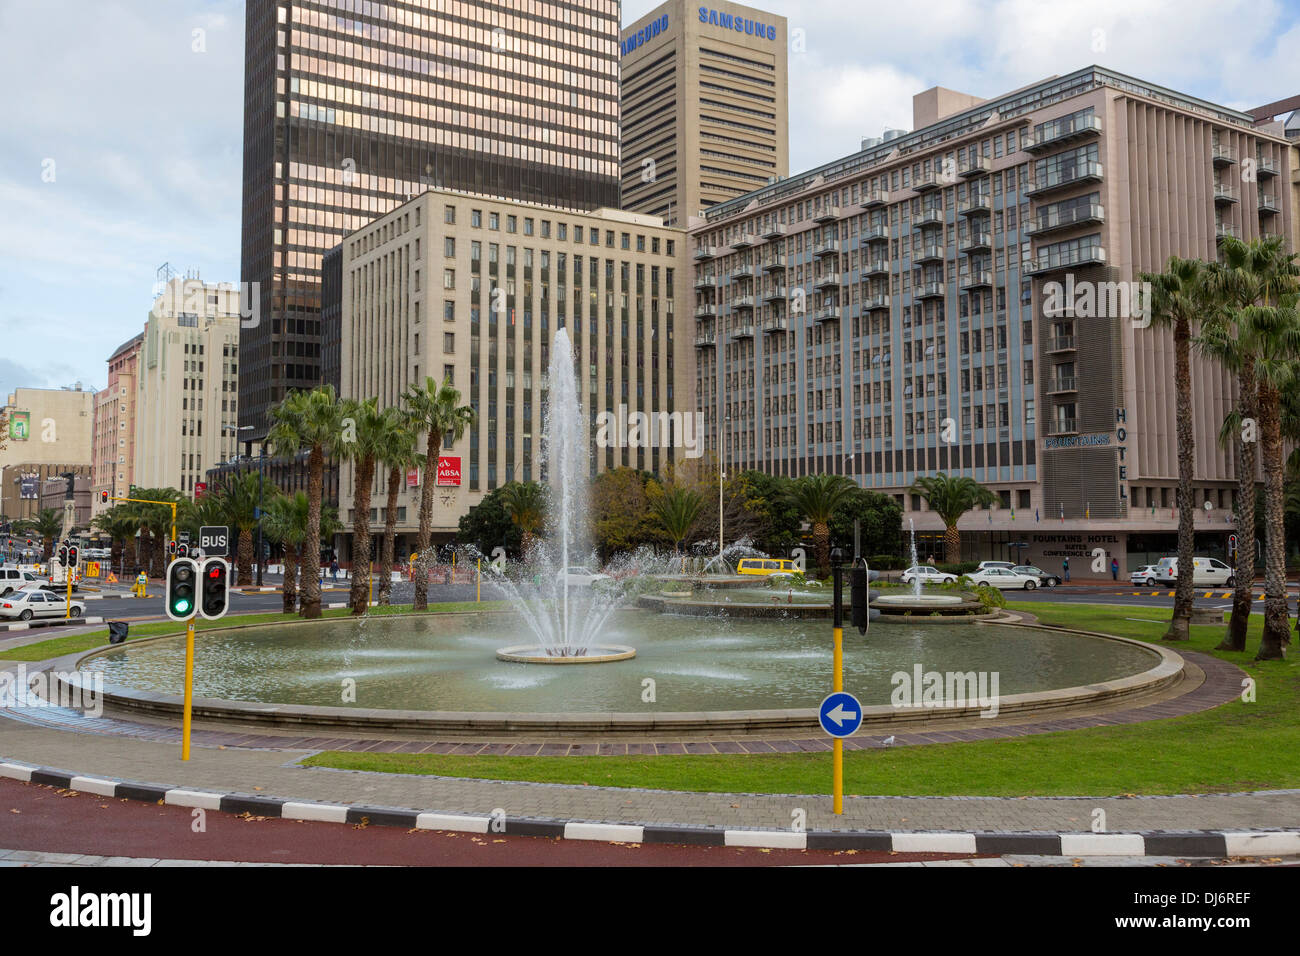 South Africa, Cape Town. The Fountains, corner of Adderley St. and Hans Strijdom Ave. Stock Photo